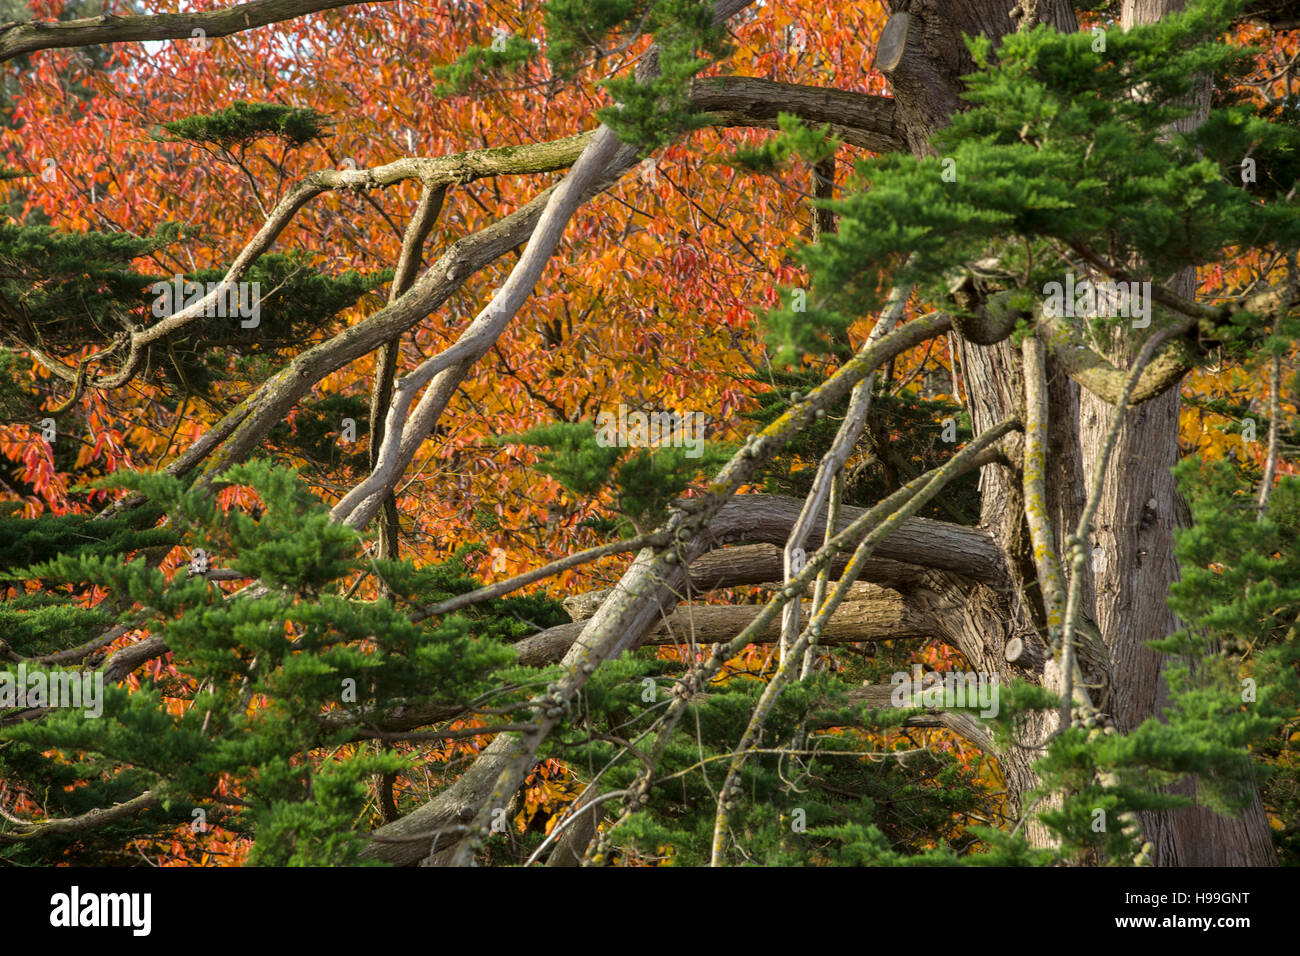 Branches of a Monterey Cyprus (Cupressus macrocarpa) tree with the fading autumn leaves of a wild cherry (Prunus avium) behind. Stock Photo